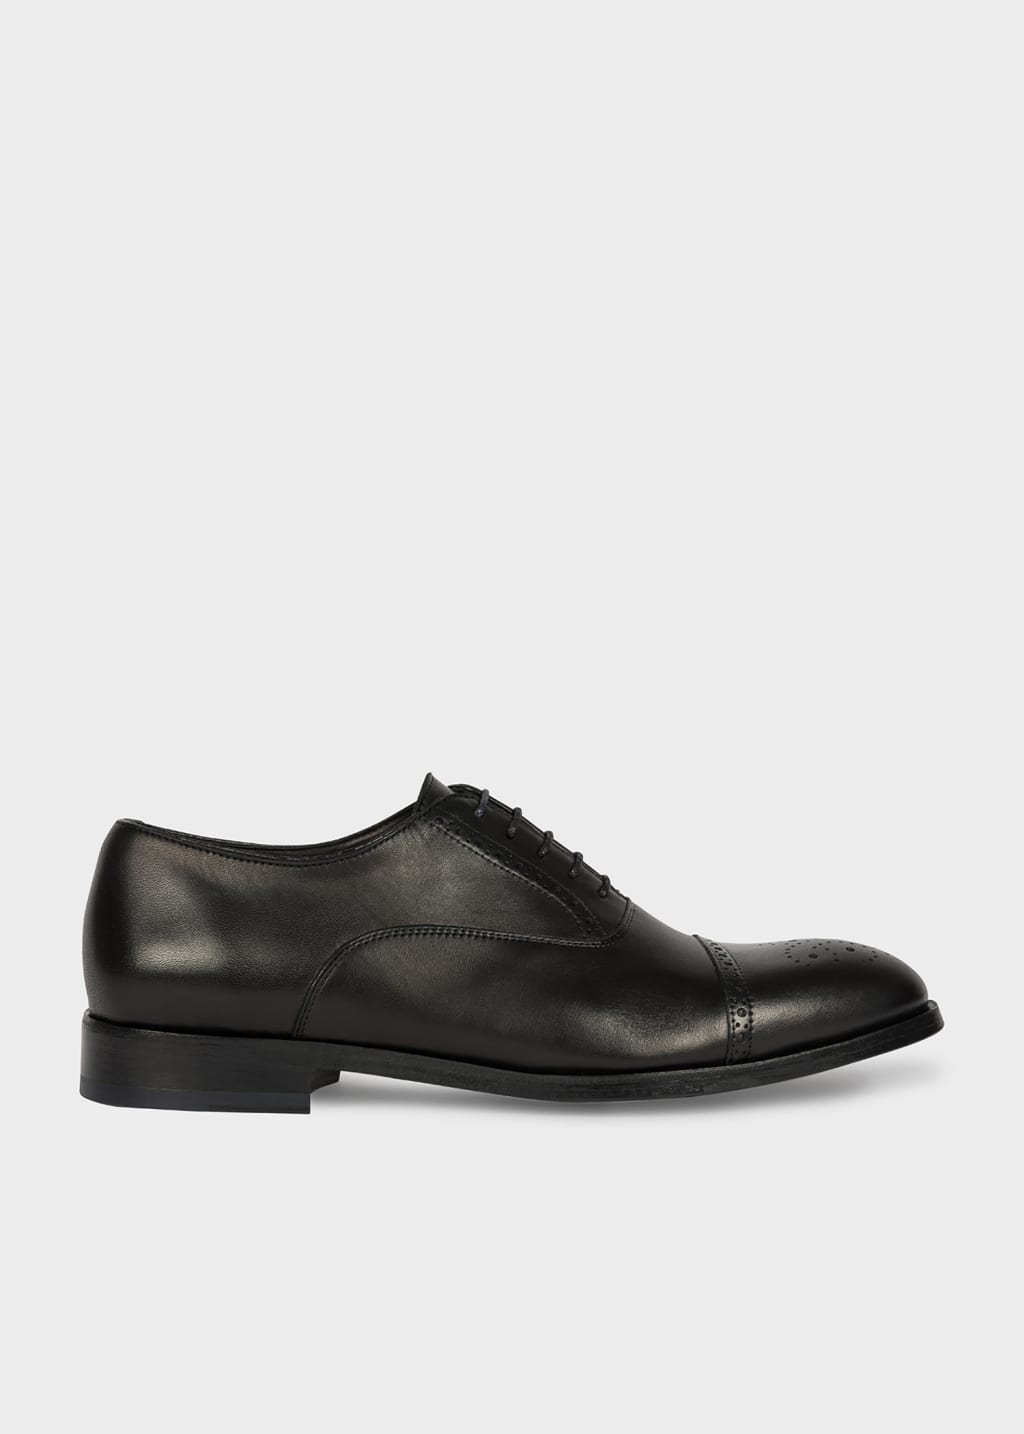 Product View - Black Leather 'Maltby' Shoes by Paul Smith